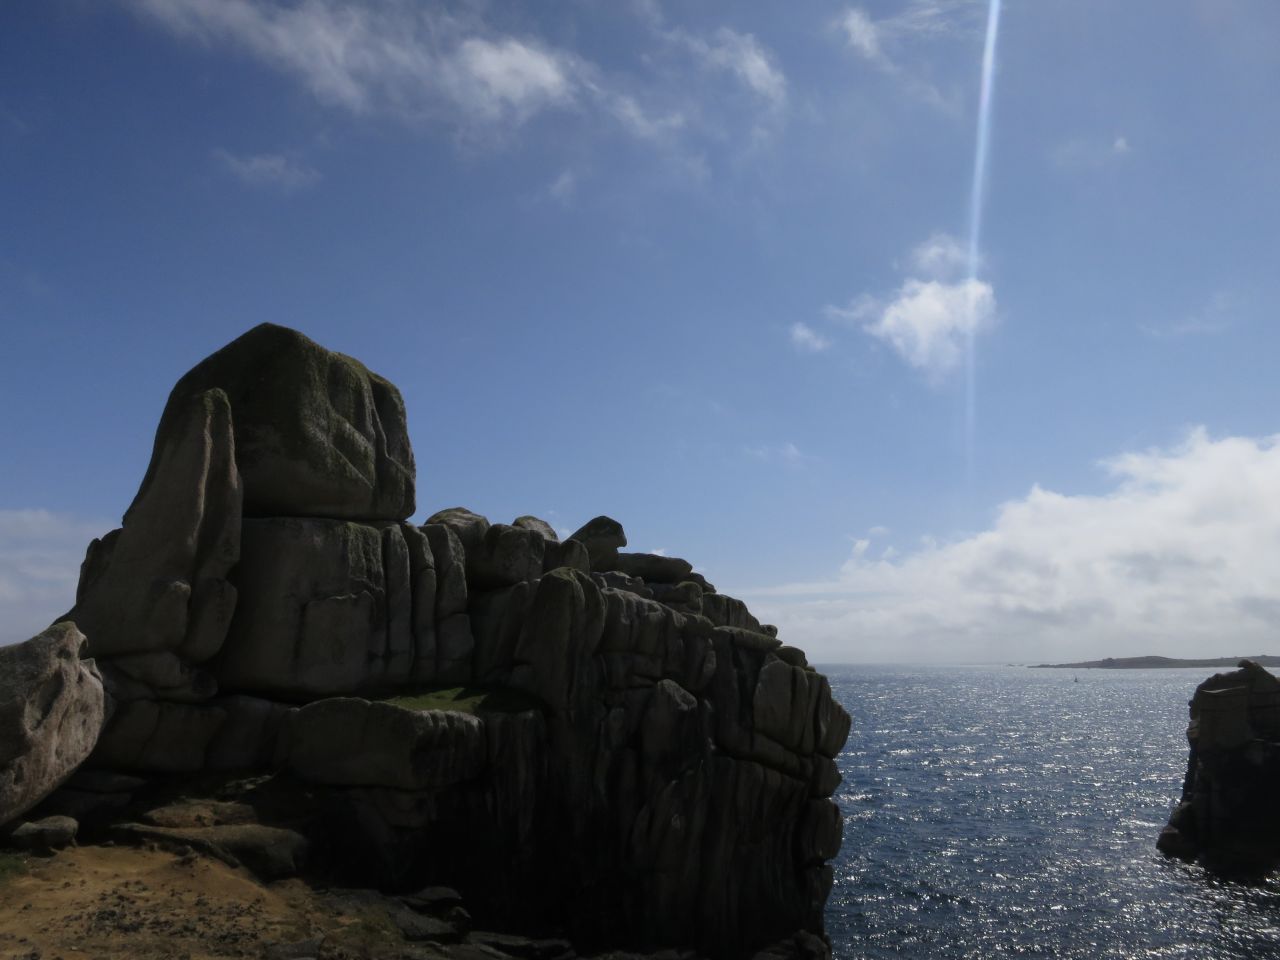 <strong>17. Isles of Scilly:</strong> Who says England doesn't have island paradises? The Isles of Scilly are located off the southwest coast. <em>Photo courtesy Paul Walter/Creative Commons/Flickr</em>